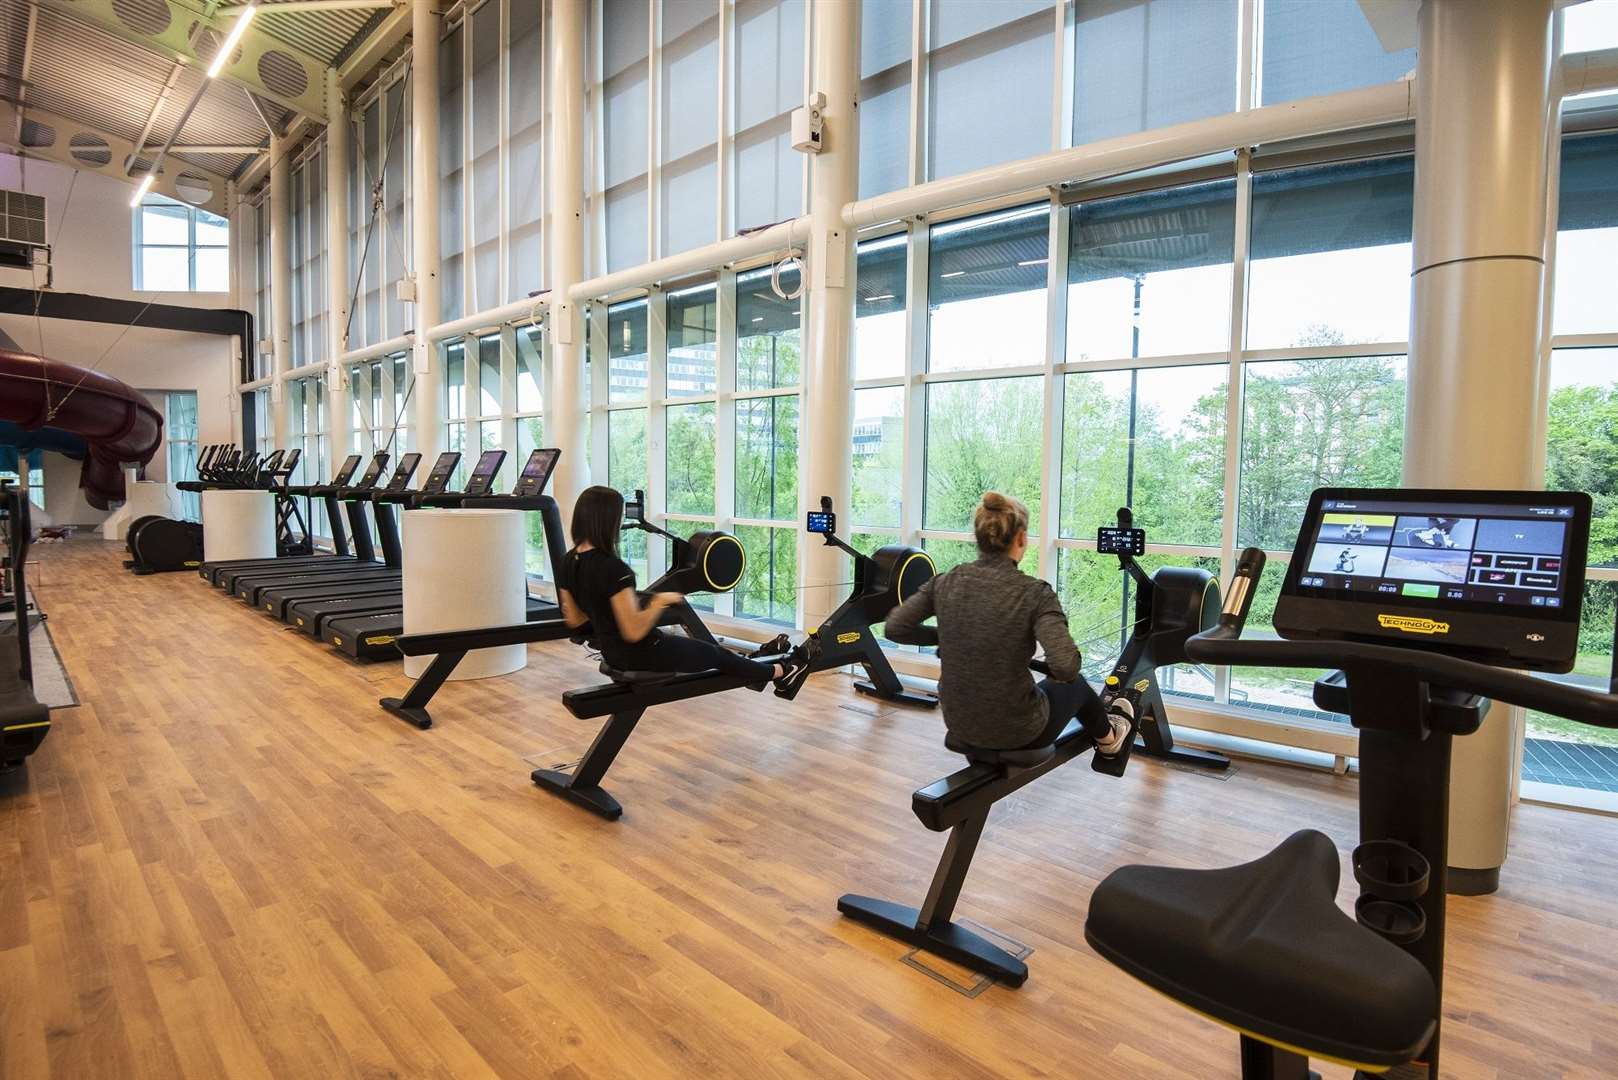 The centre's gym has been expanded to accommodate more users and equipment